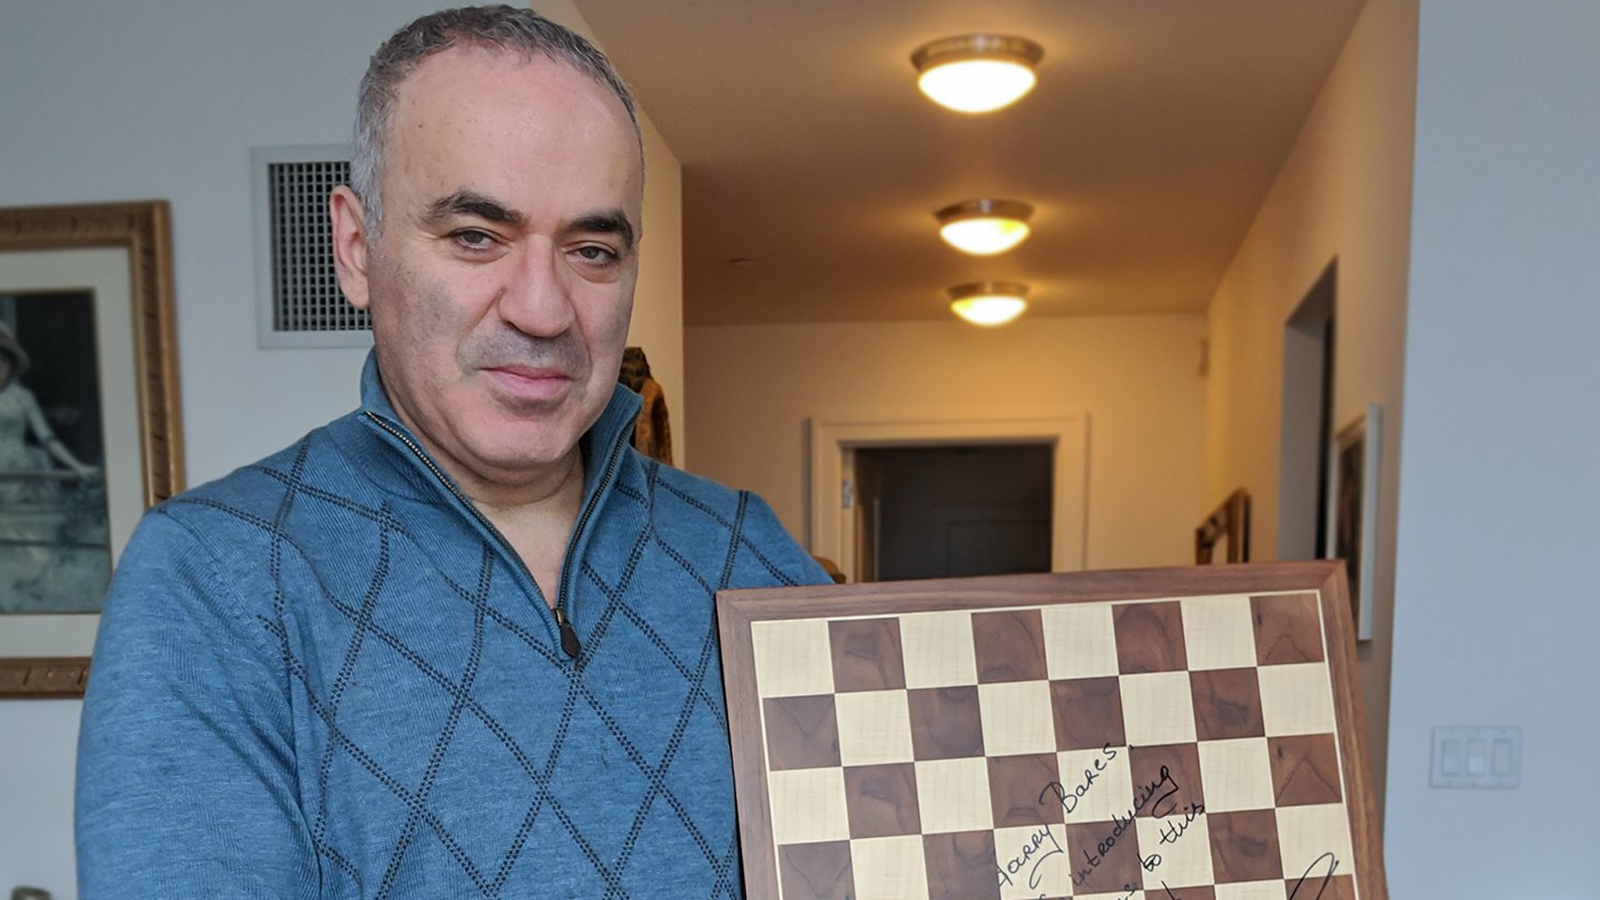 Hans Niemann and the chequered history of chess cheating